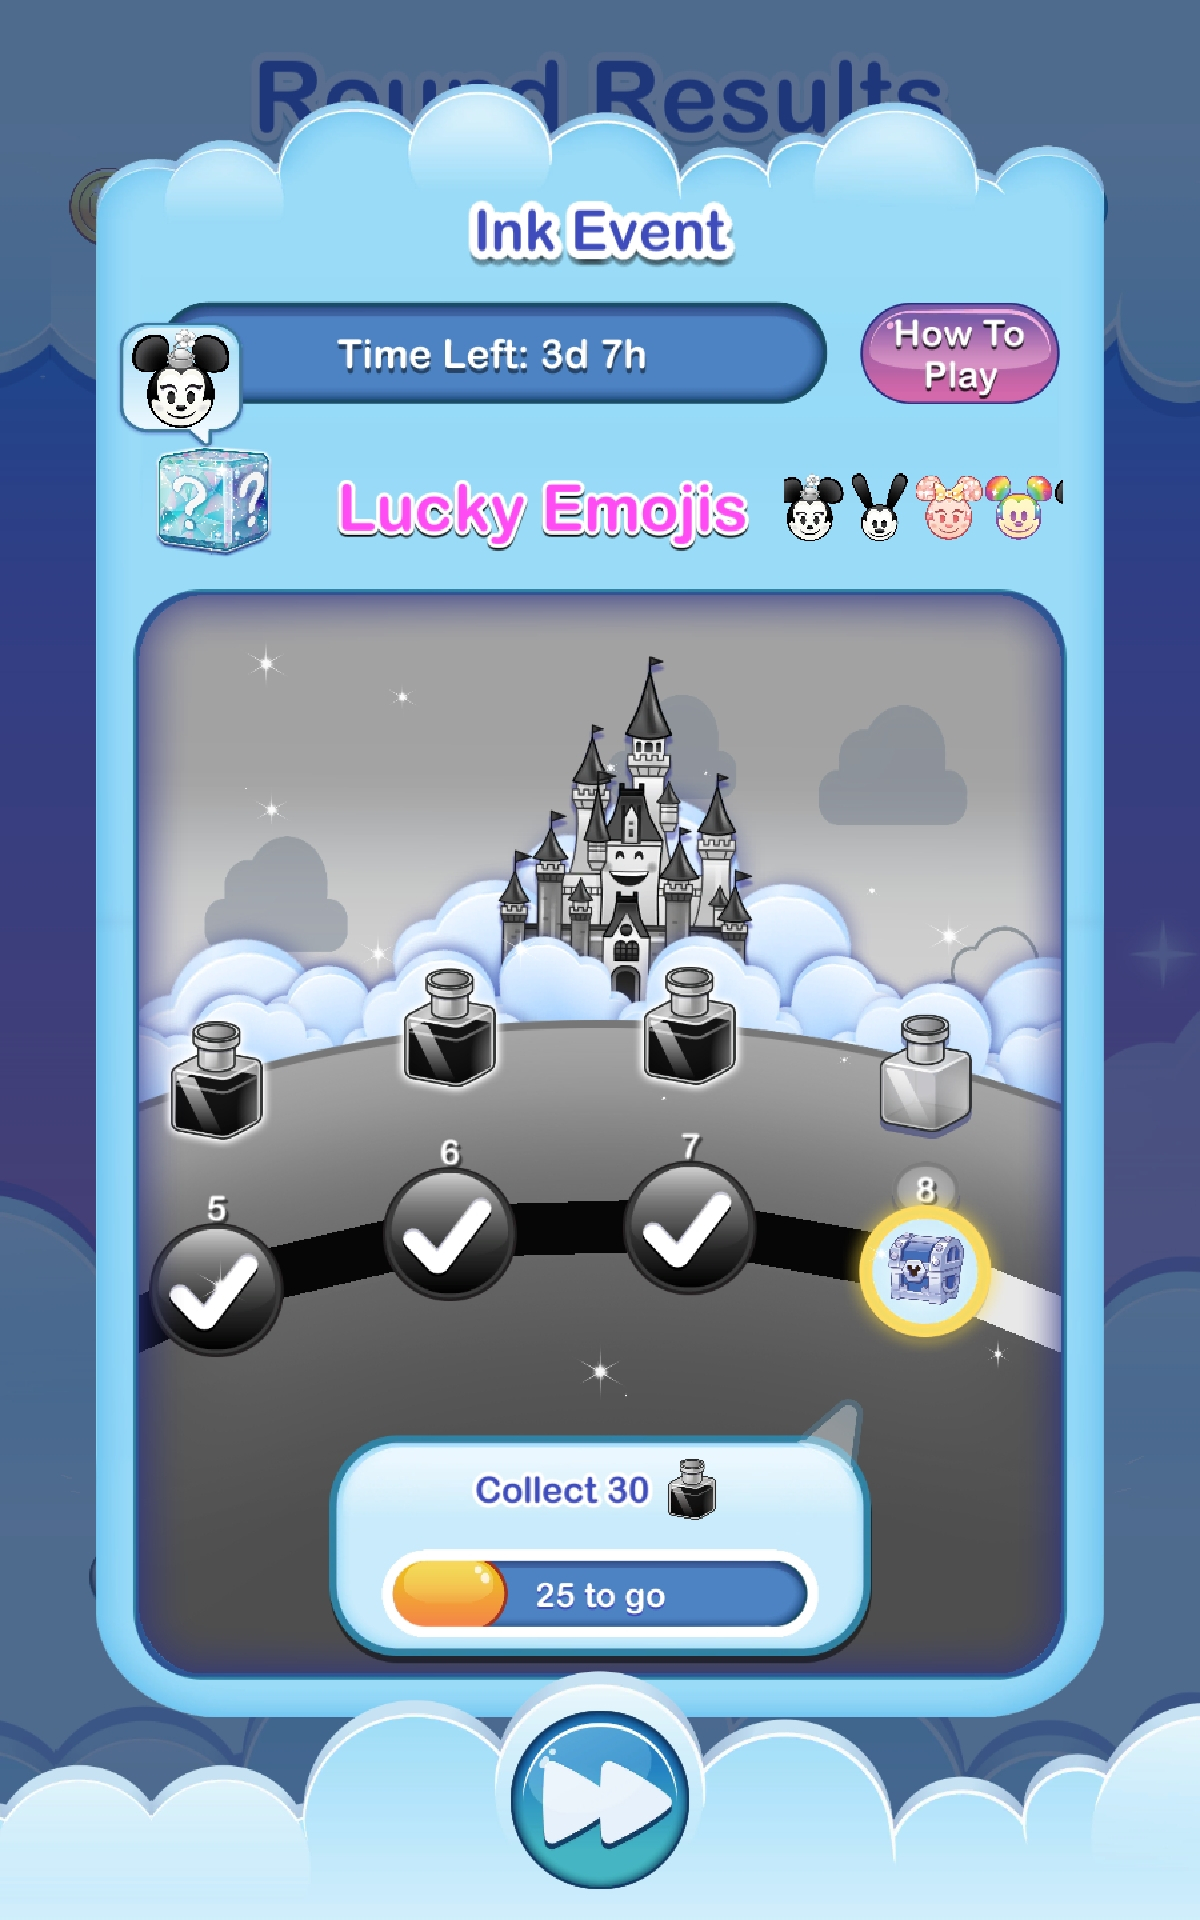 This Ink Clear Event Is So Pretty : Disneyemojiblitz within Emoji Blitz Events 2020